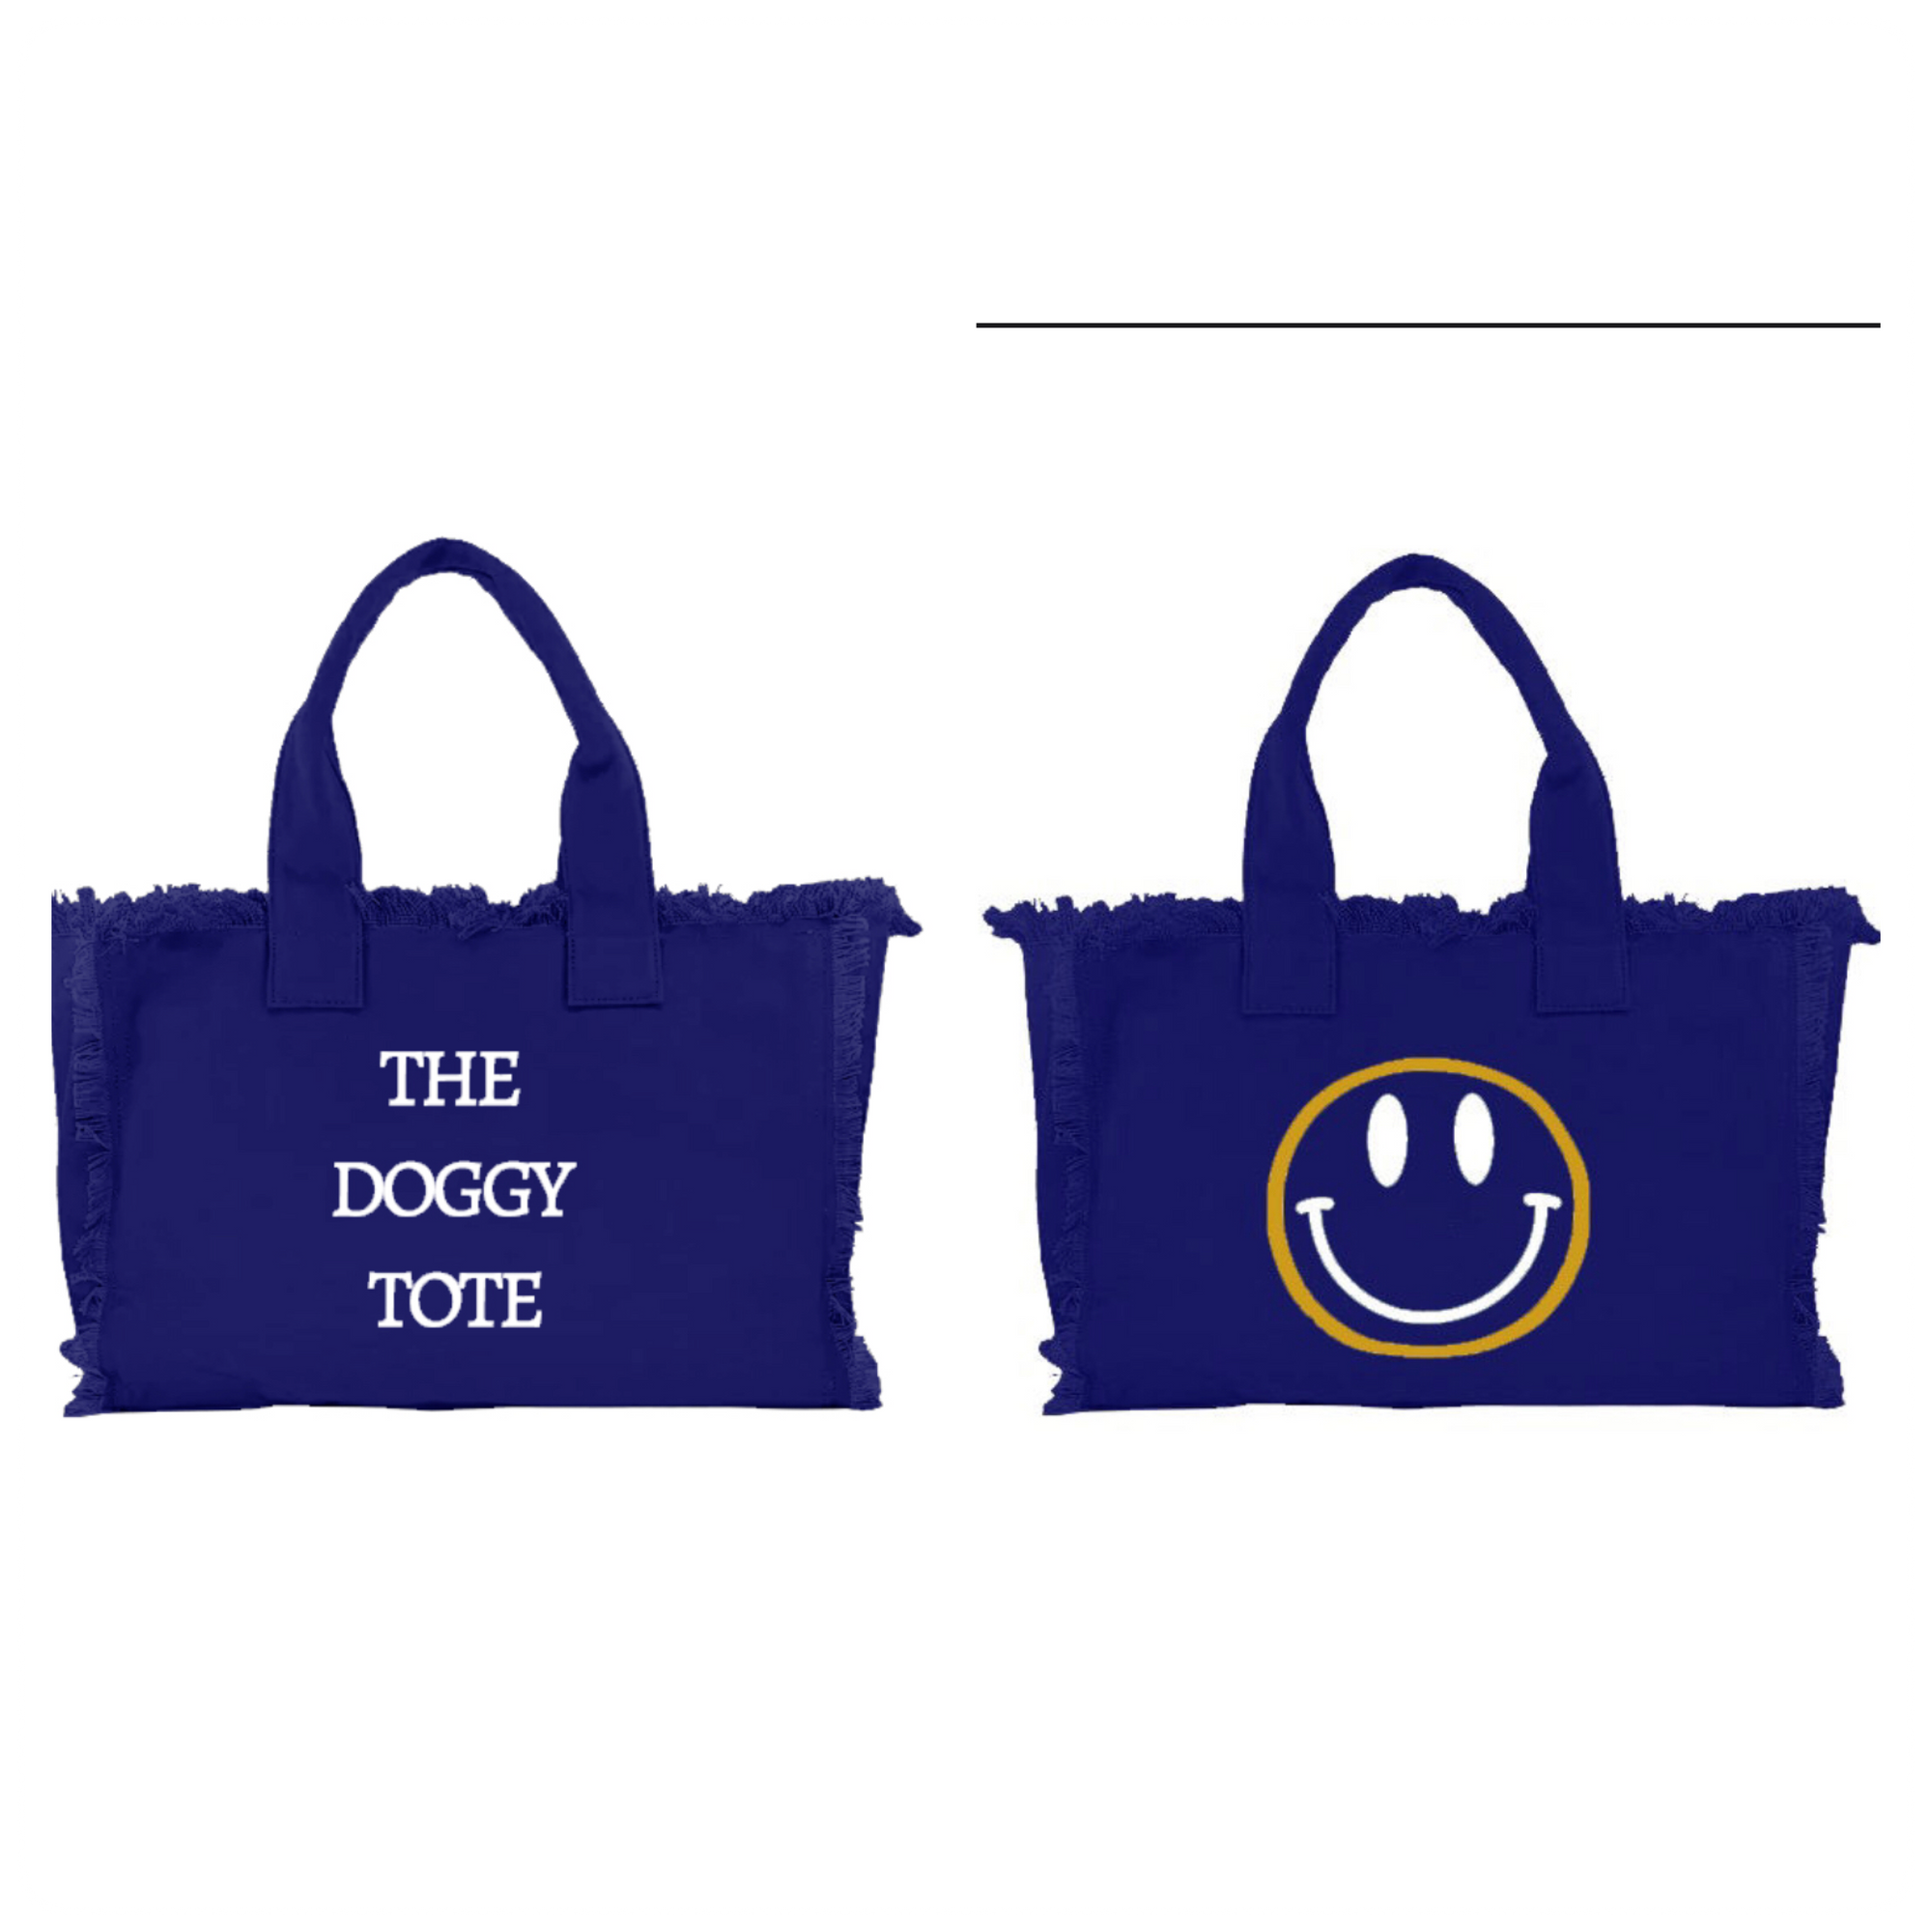 THE DOGGY TOTE